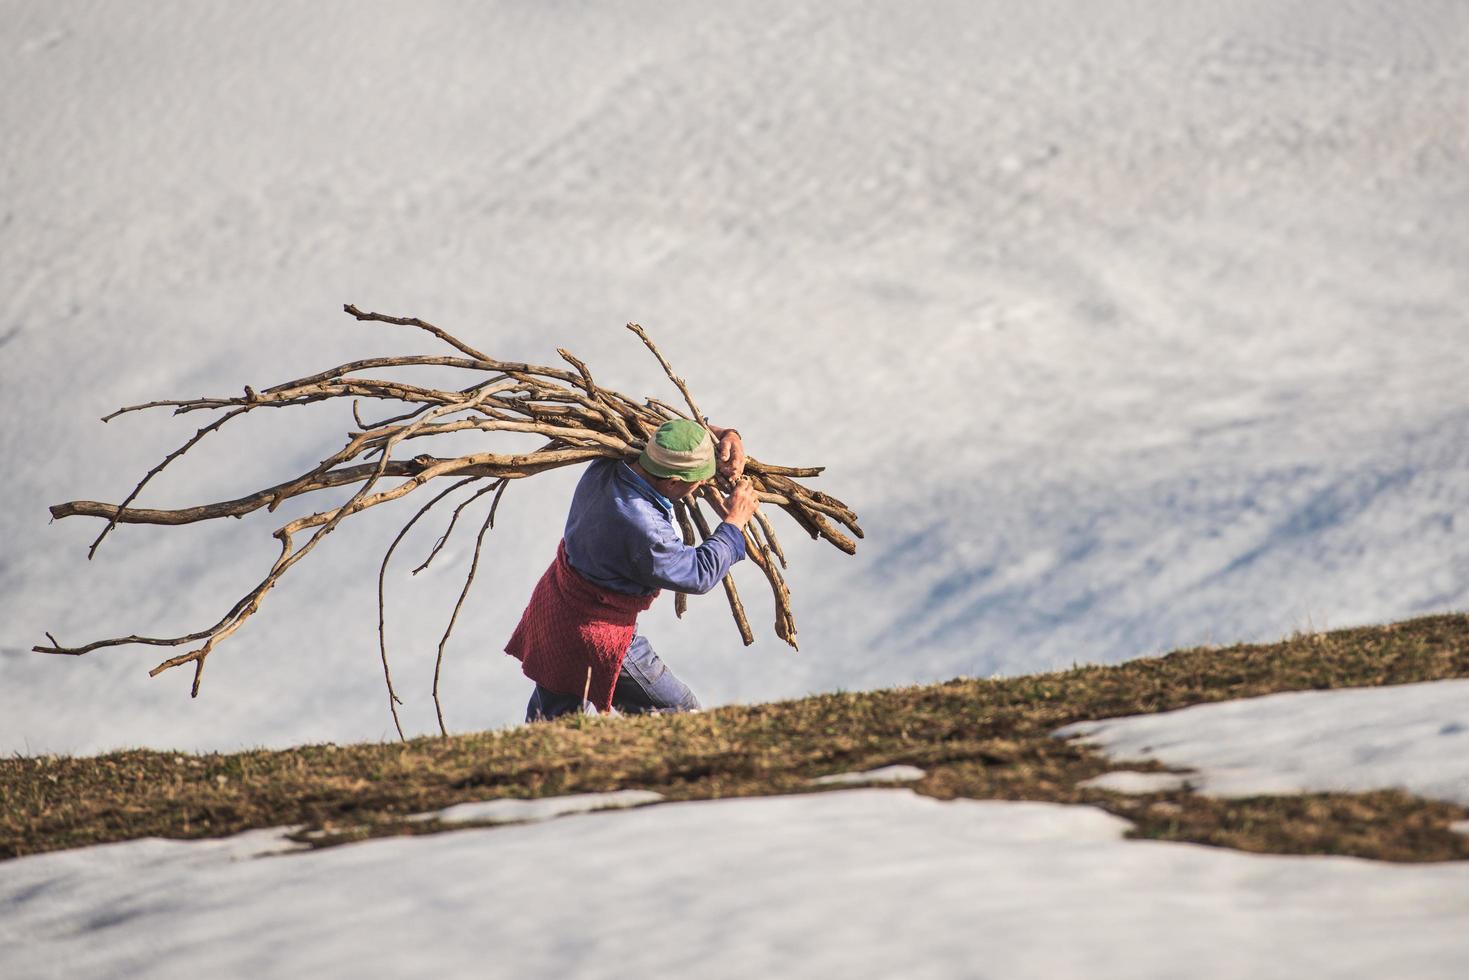 Man carries firewood towards home in rural place in snow photo